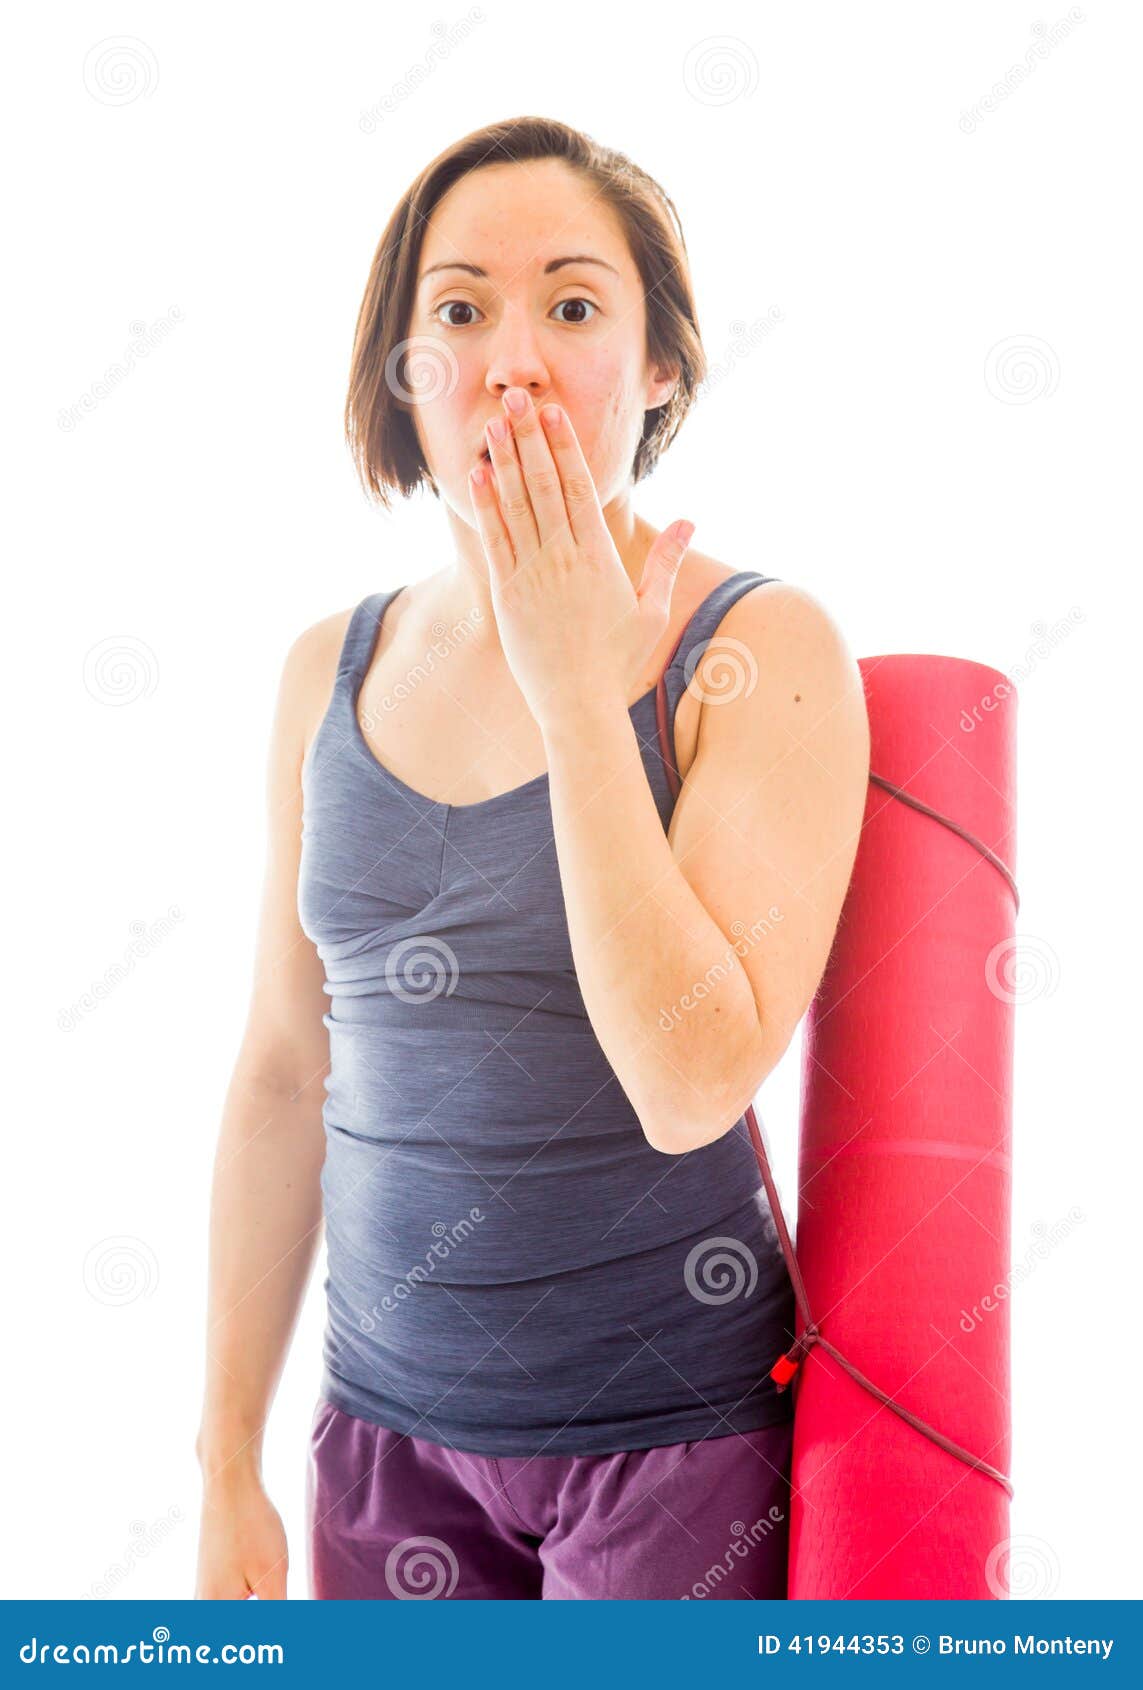 Young Woman Carrying Exercise Mat with Hand Over Her Mouth and S Stock ...